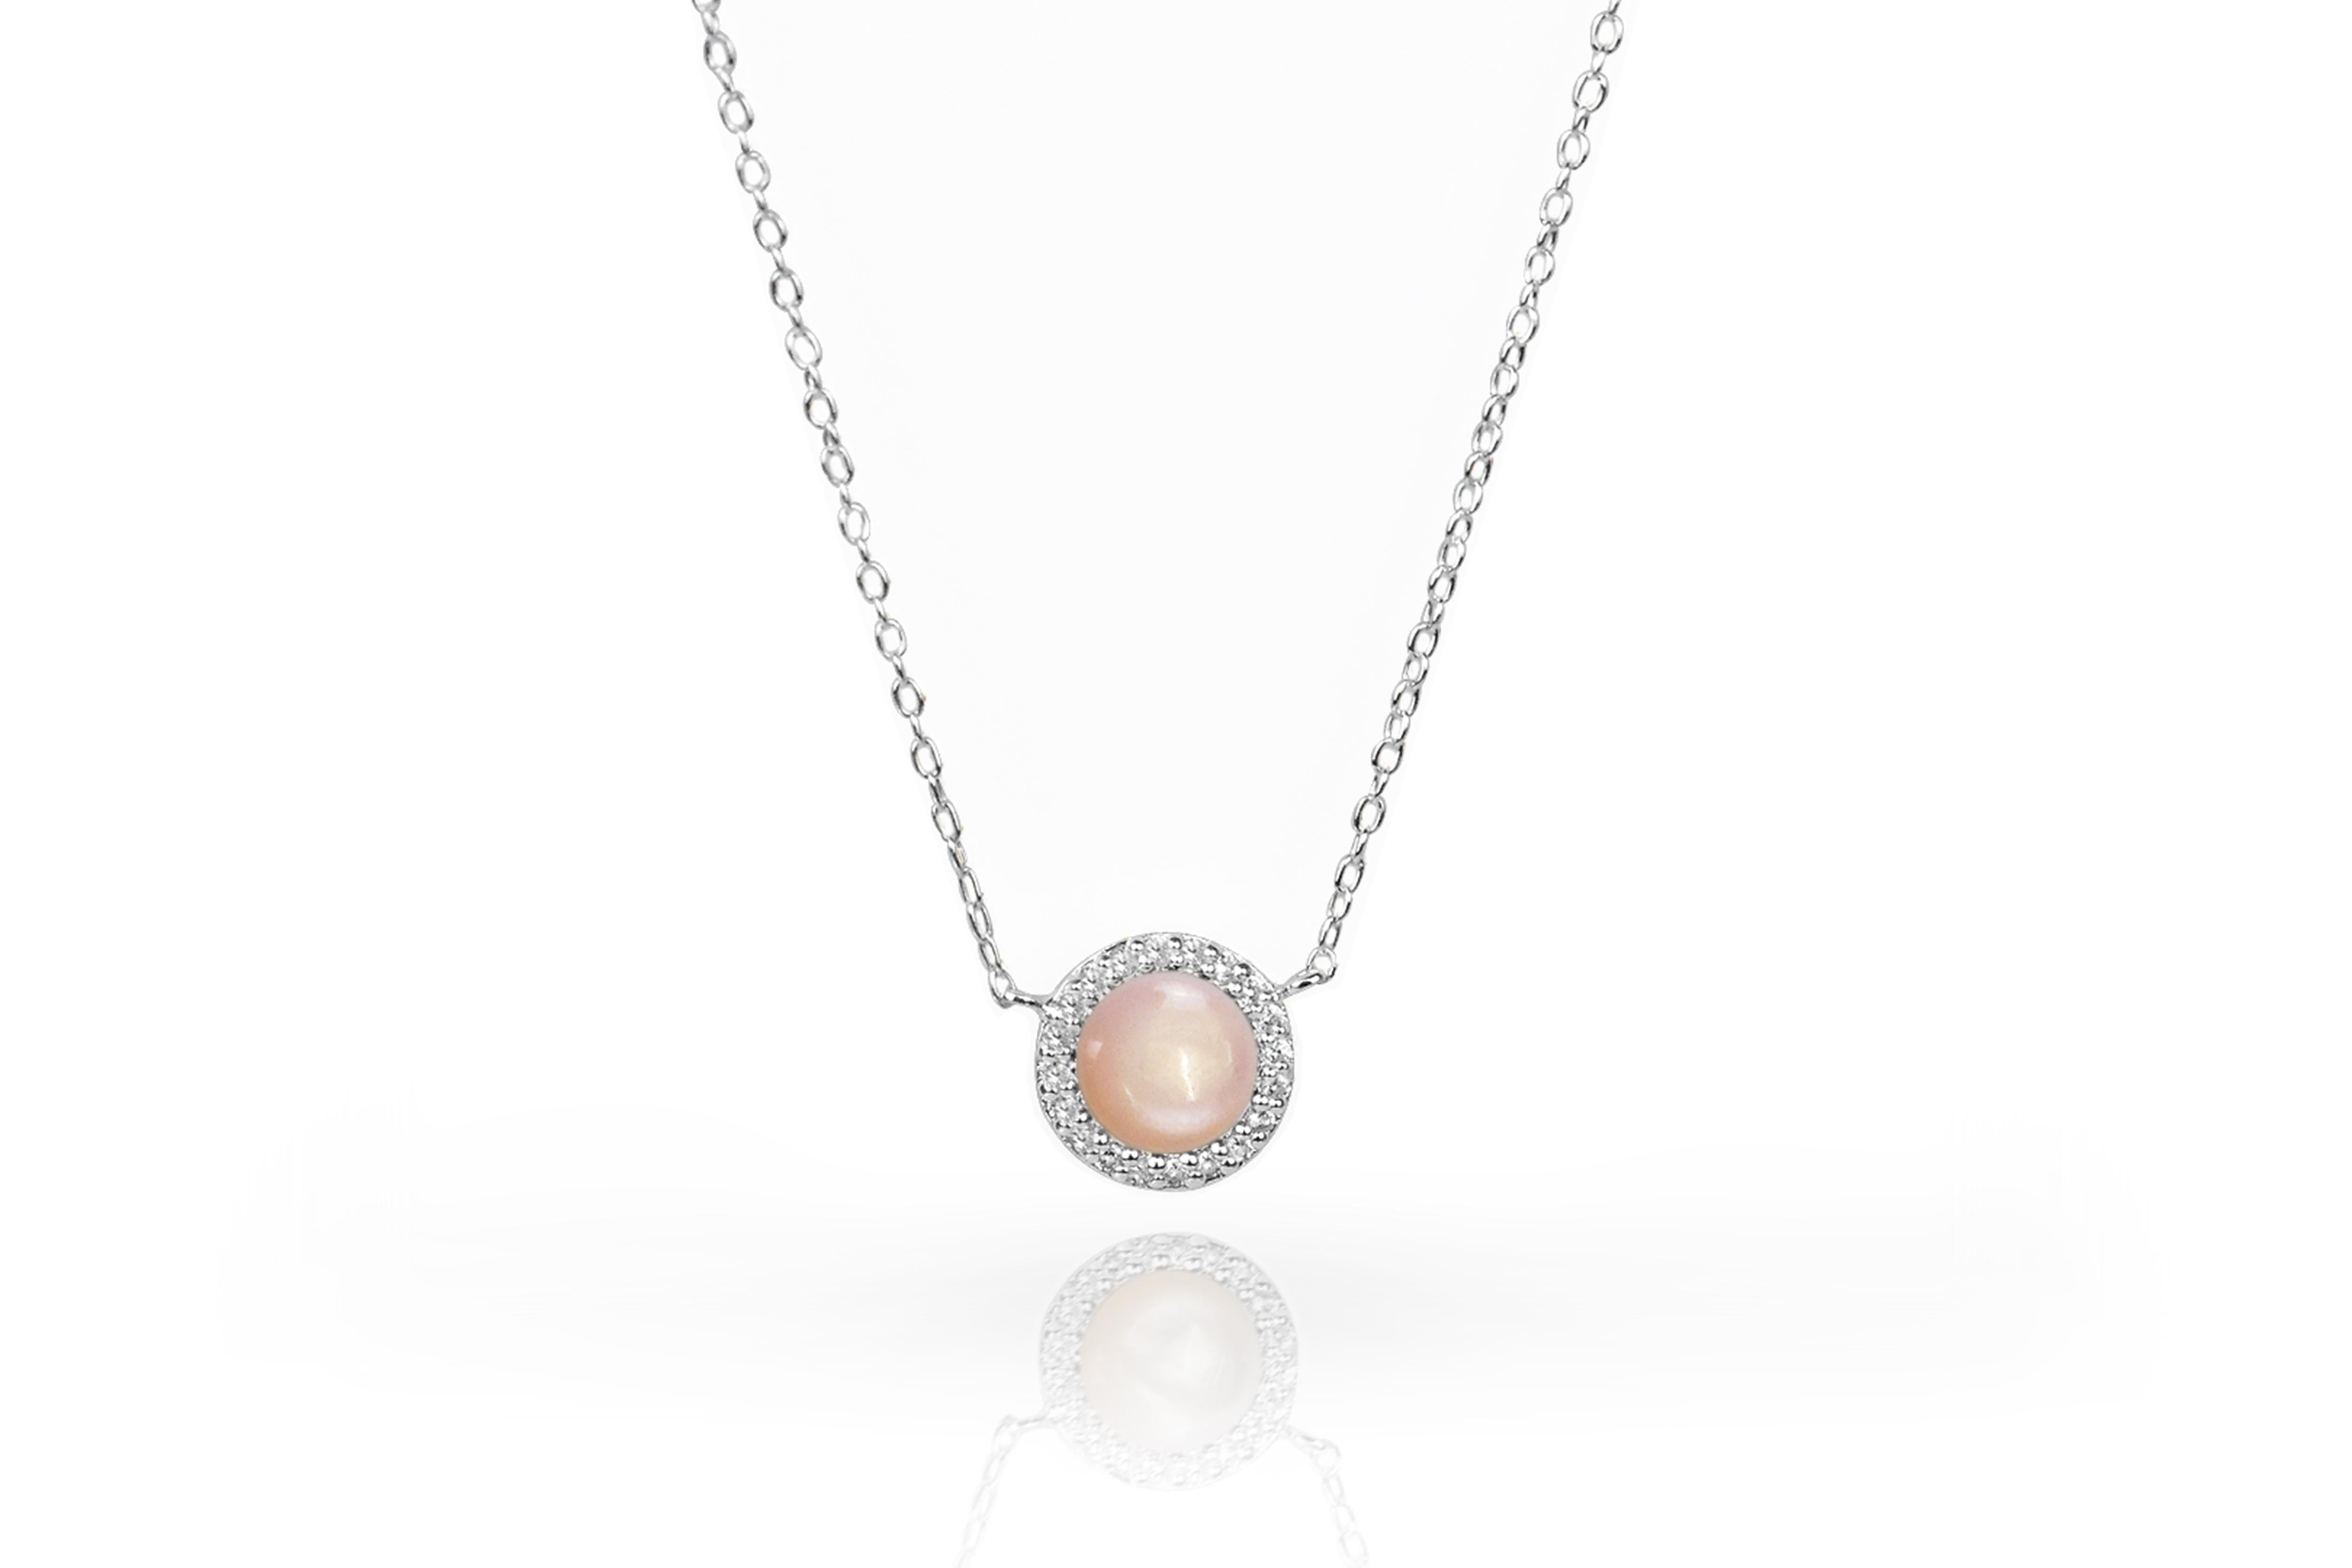 Gemstone Circle Necklace is made of 14k solid gold available in three colors of gold and four options of gemstone.
Gold: White Gold / Rose Gold / Yellow Gold.
Gemstone: Abalone / Tahitian Black MOP / White MOP / Pink MOP

Delicate Minimal Necklace